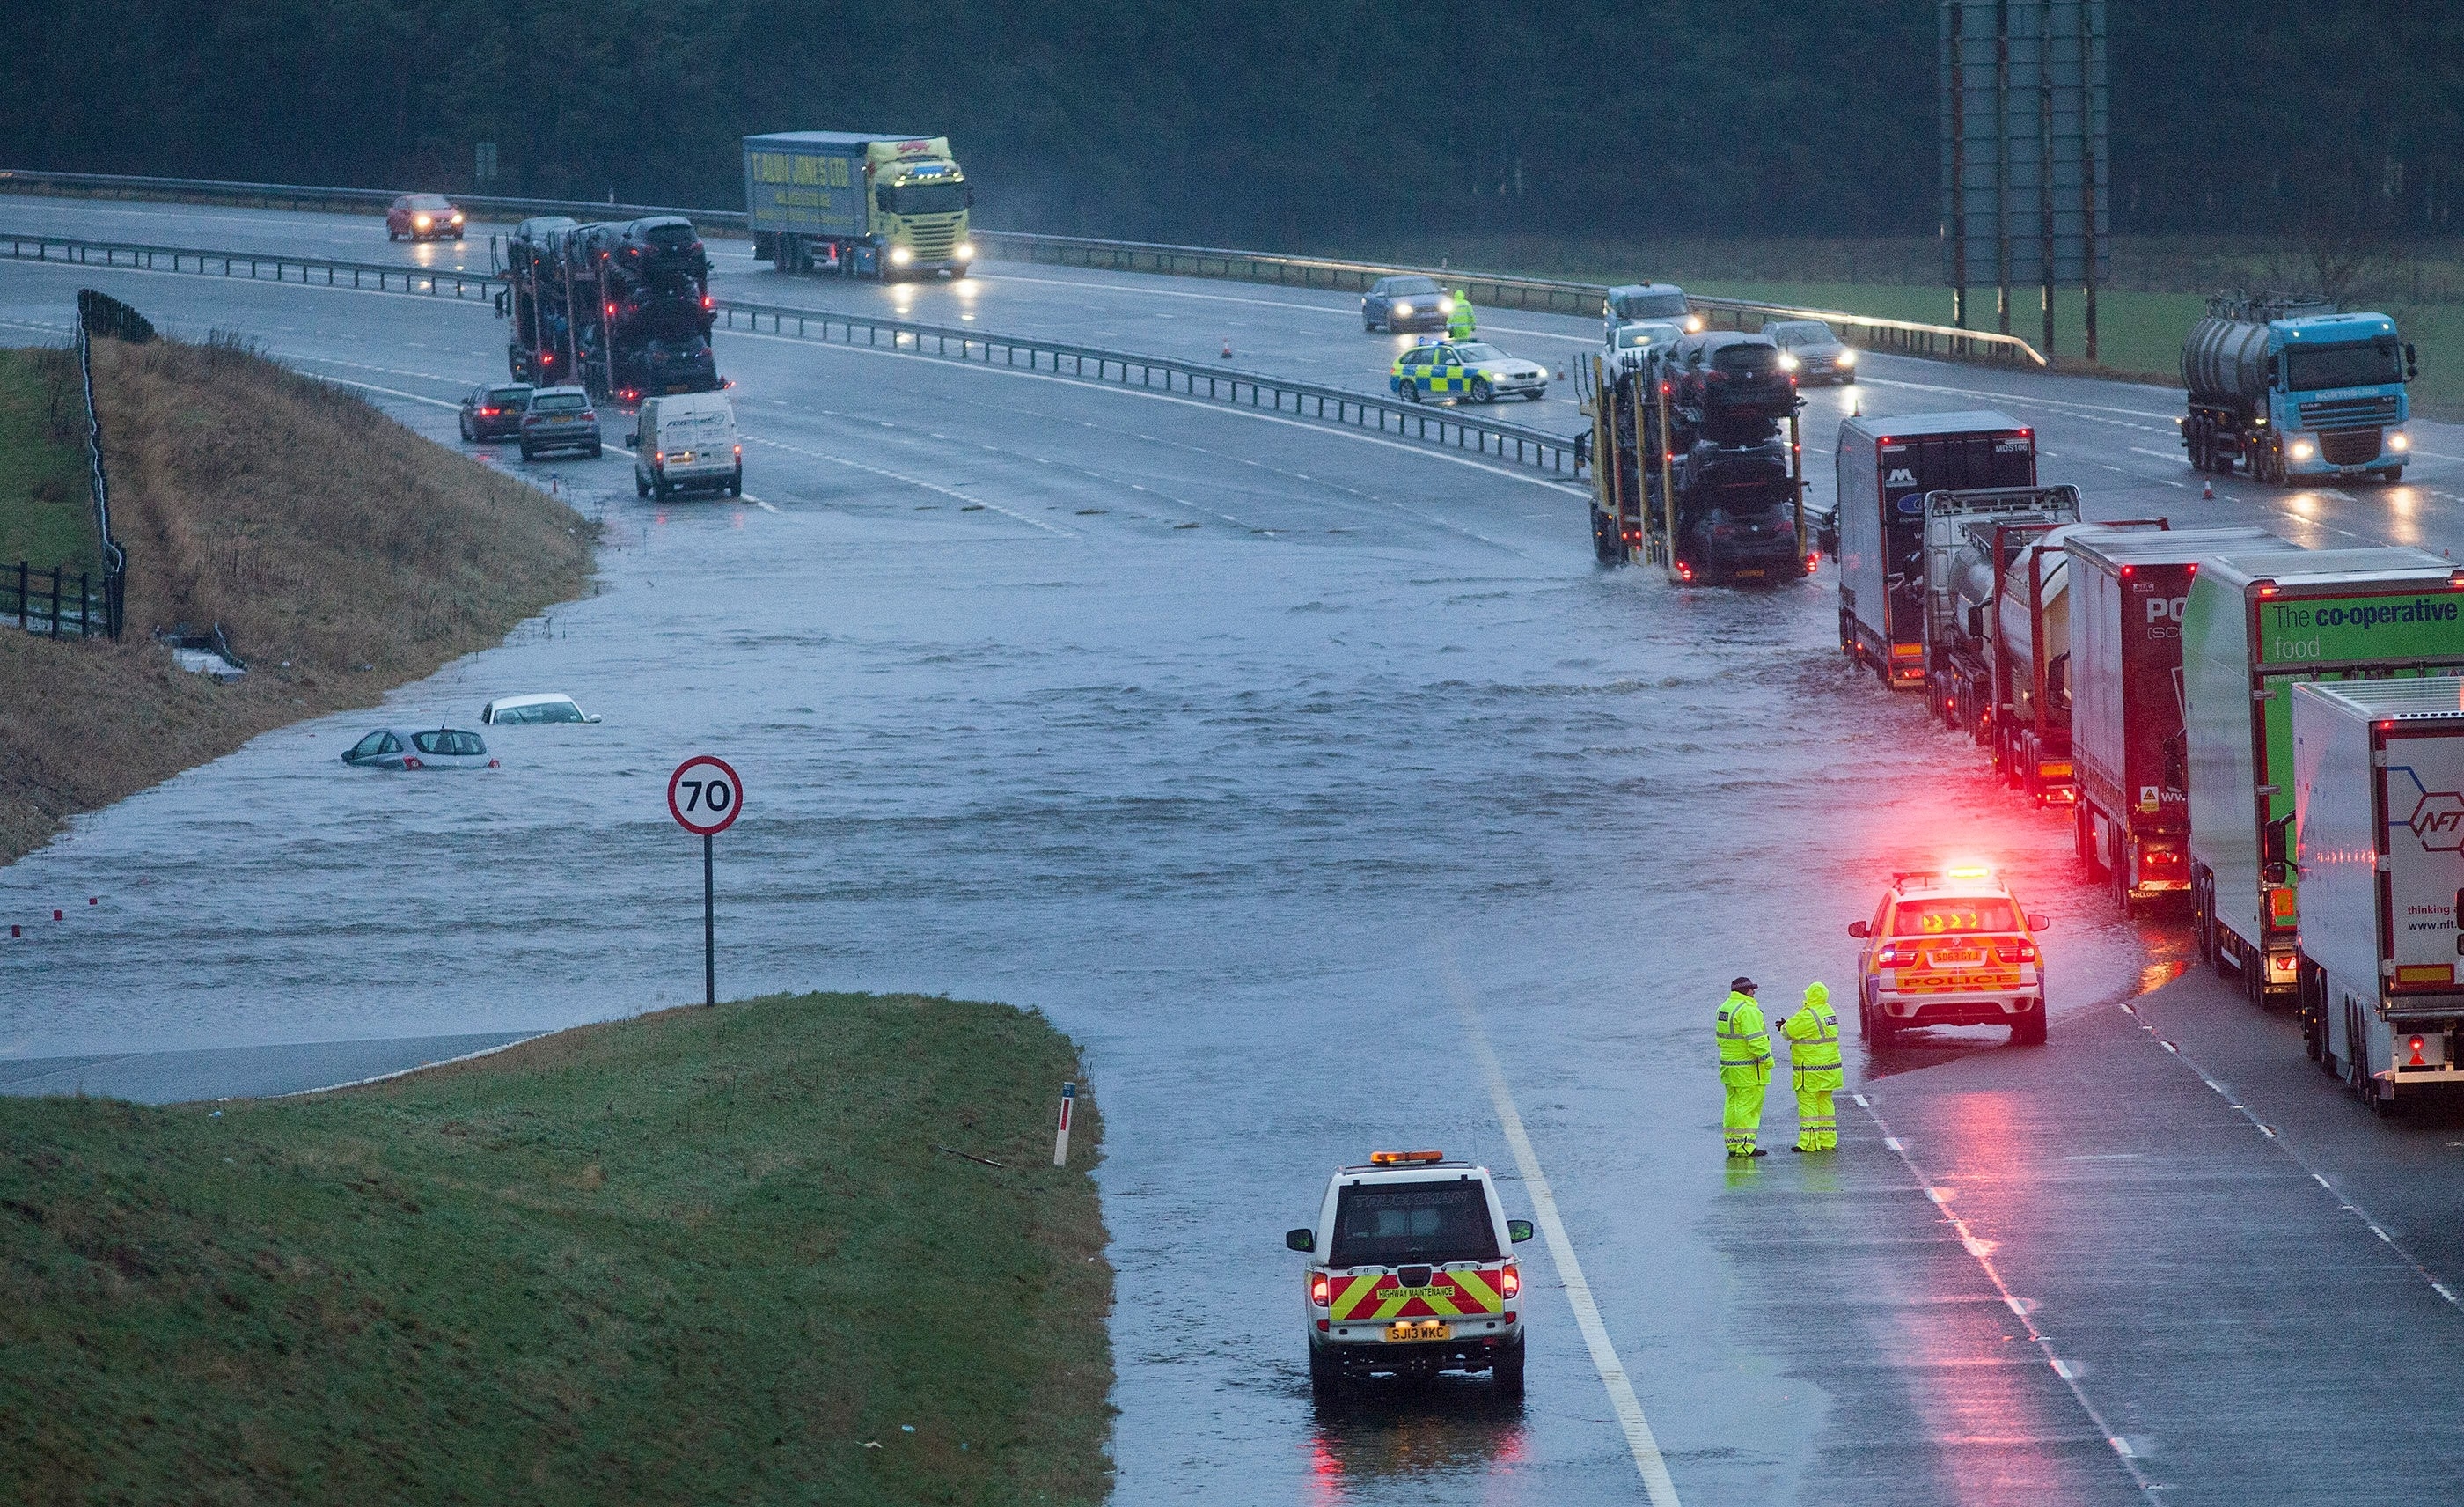 M74 northbound at J13 Abington is closed due to flooding caused by Storm Frank. Vehicles are seen floating in water and lorries pass with care. Dec 30 2015